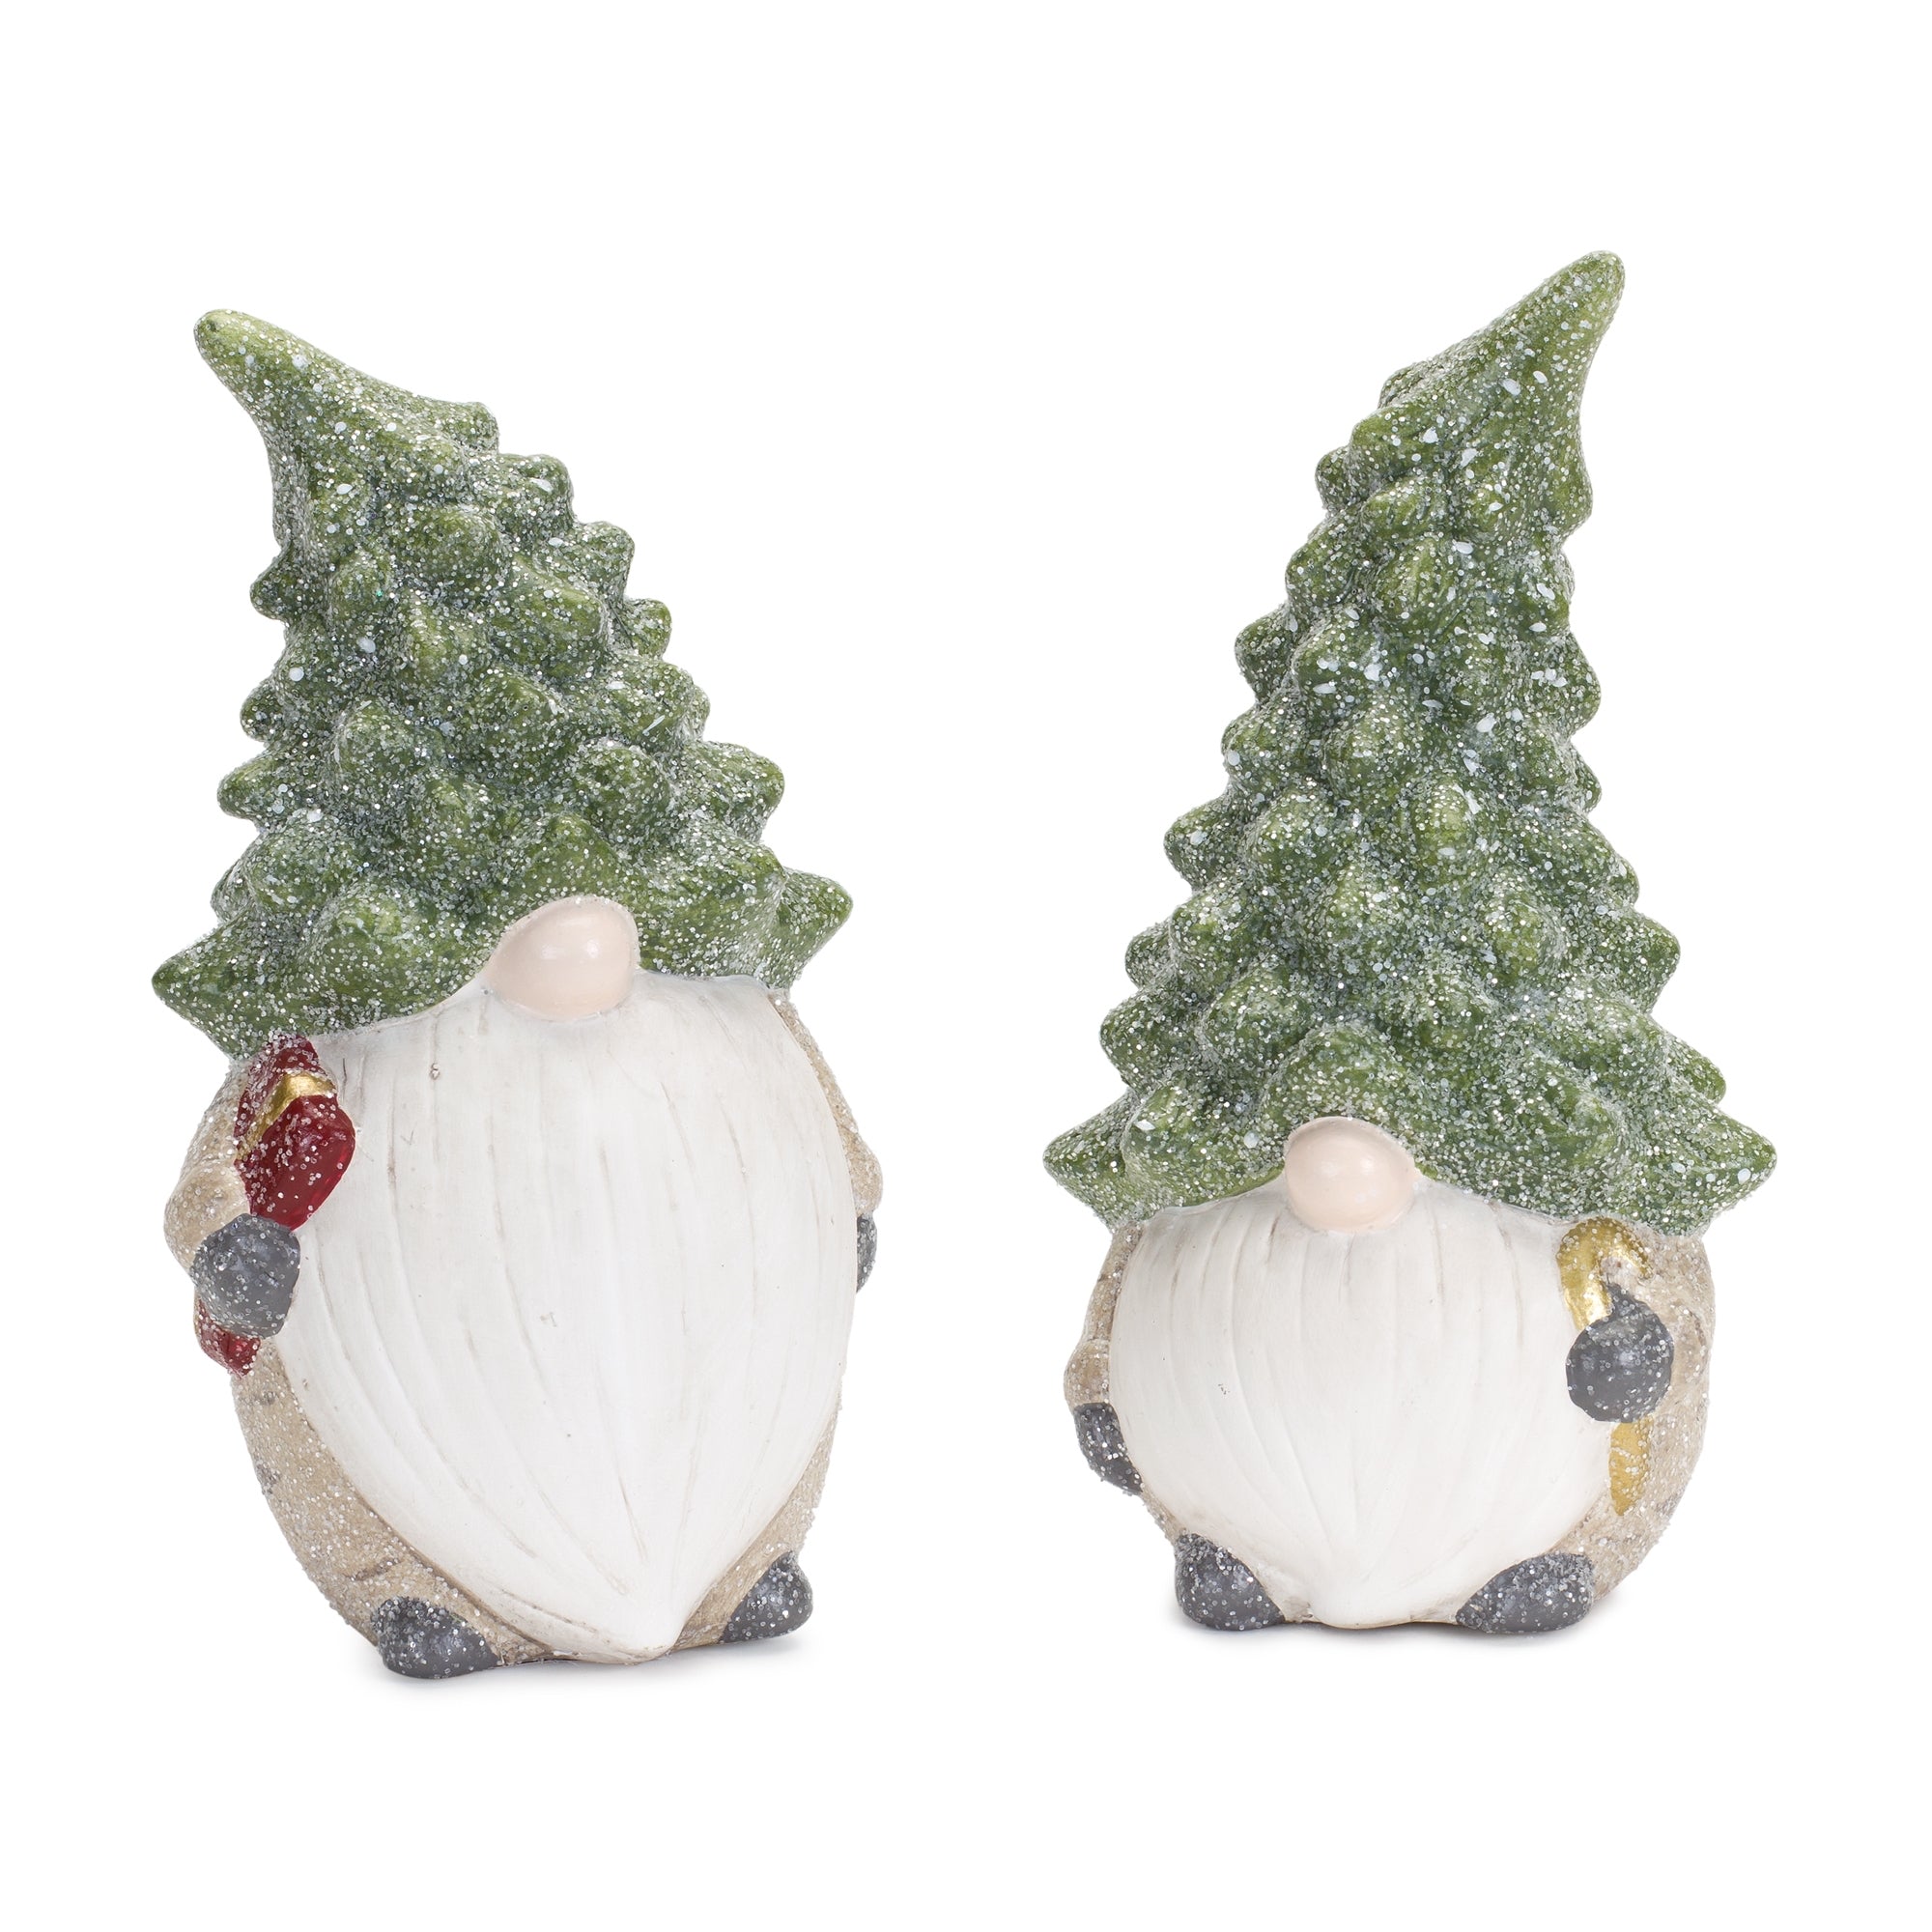 Gnome with Tree Hat Figurine - 2 Styles